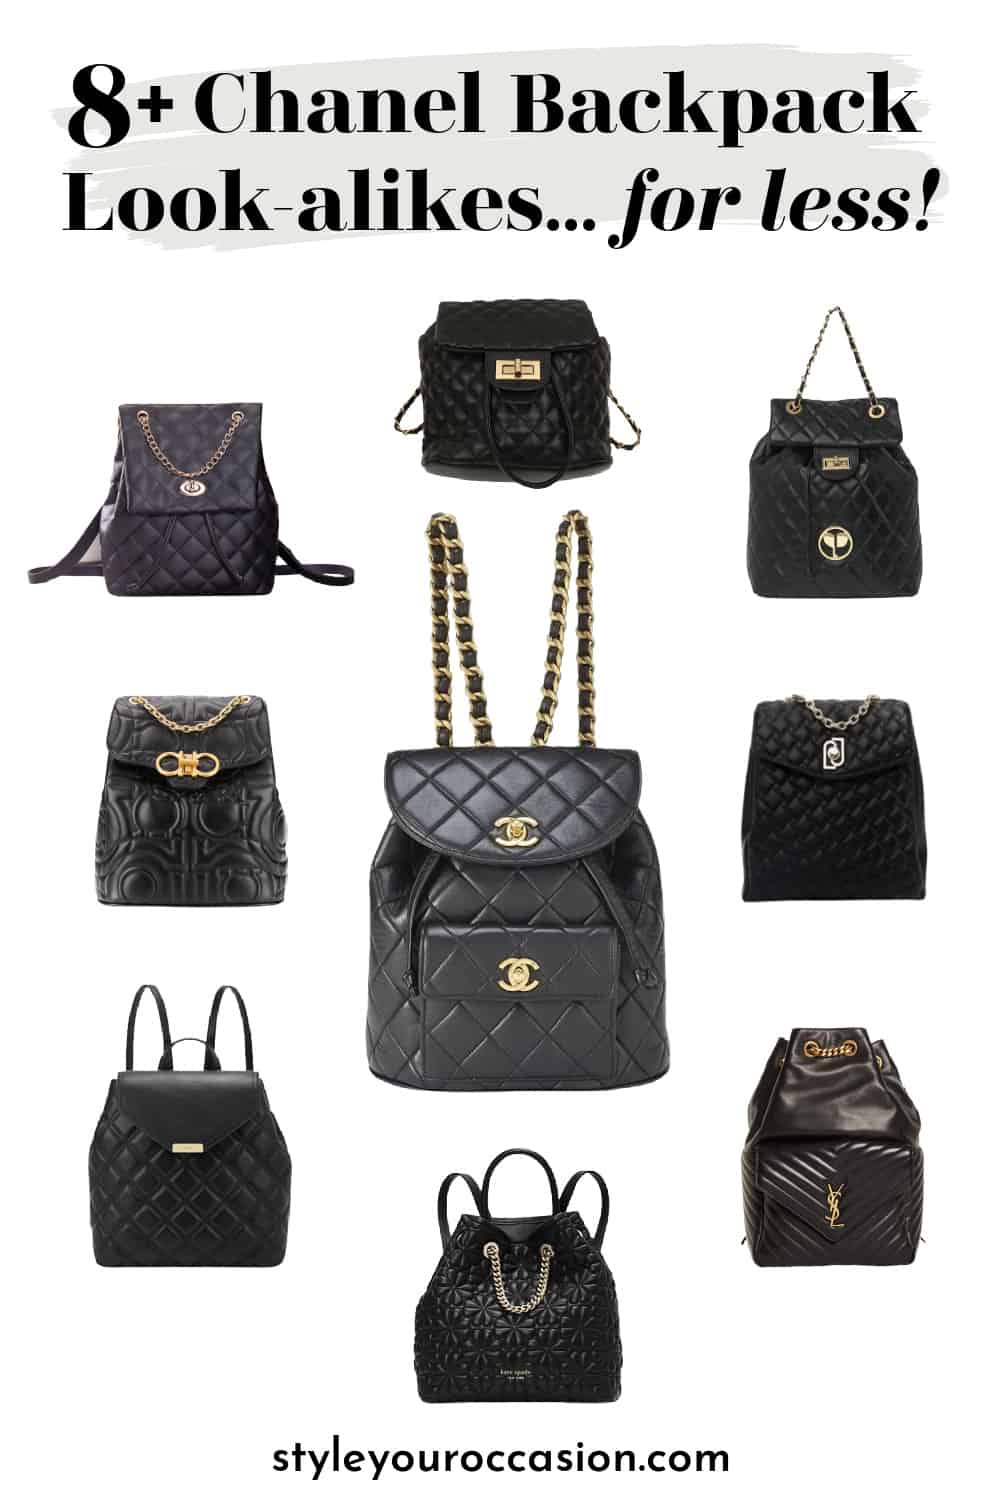 Chanel Backpack Dupe | 8+ Look-alikes You Have To See!